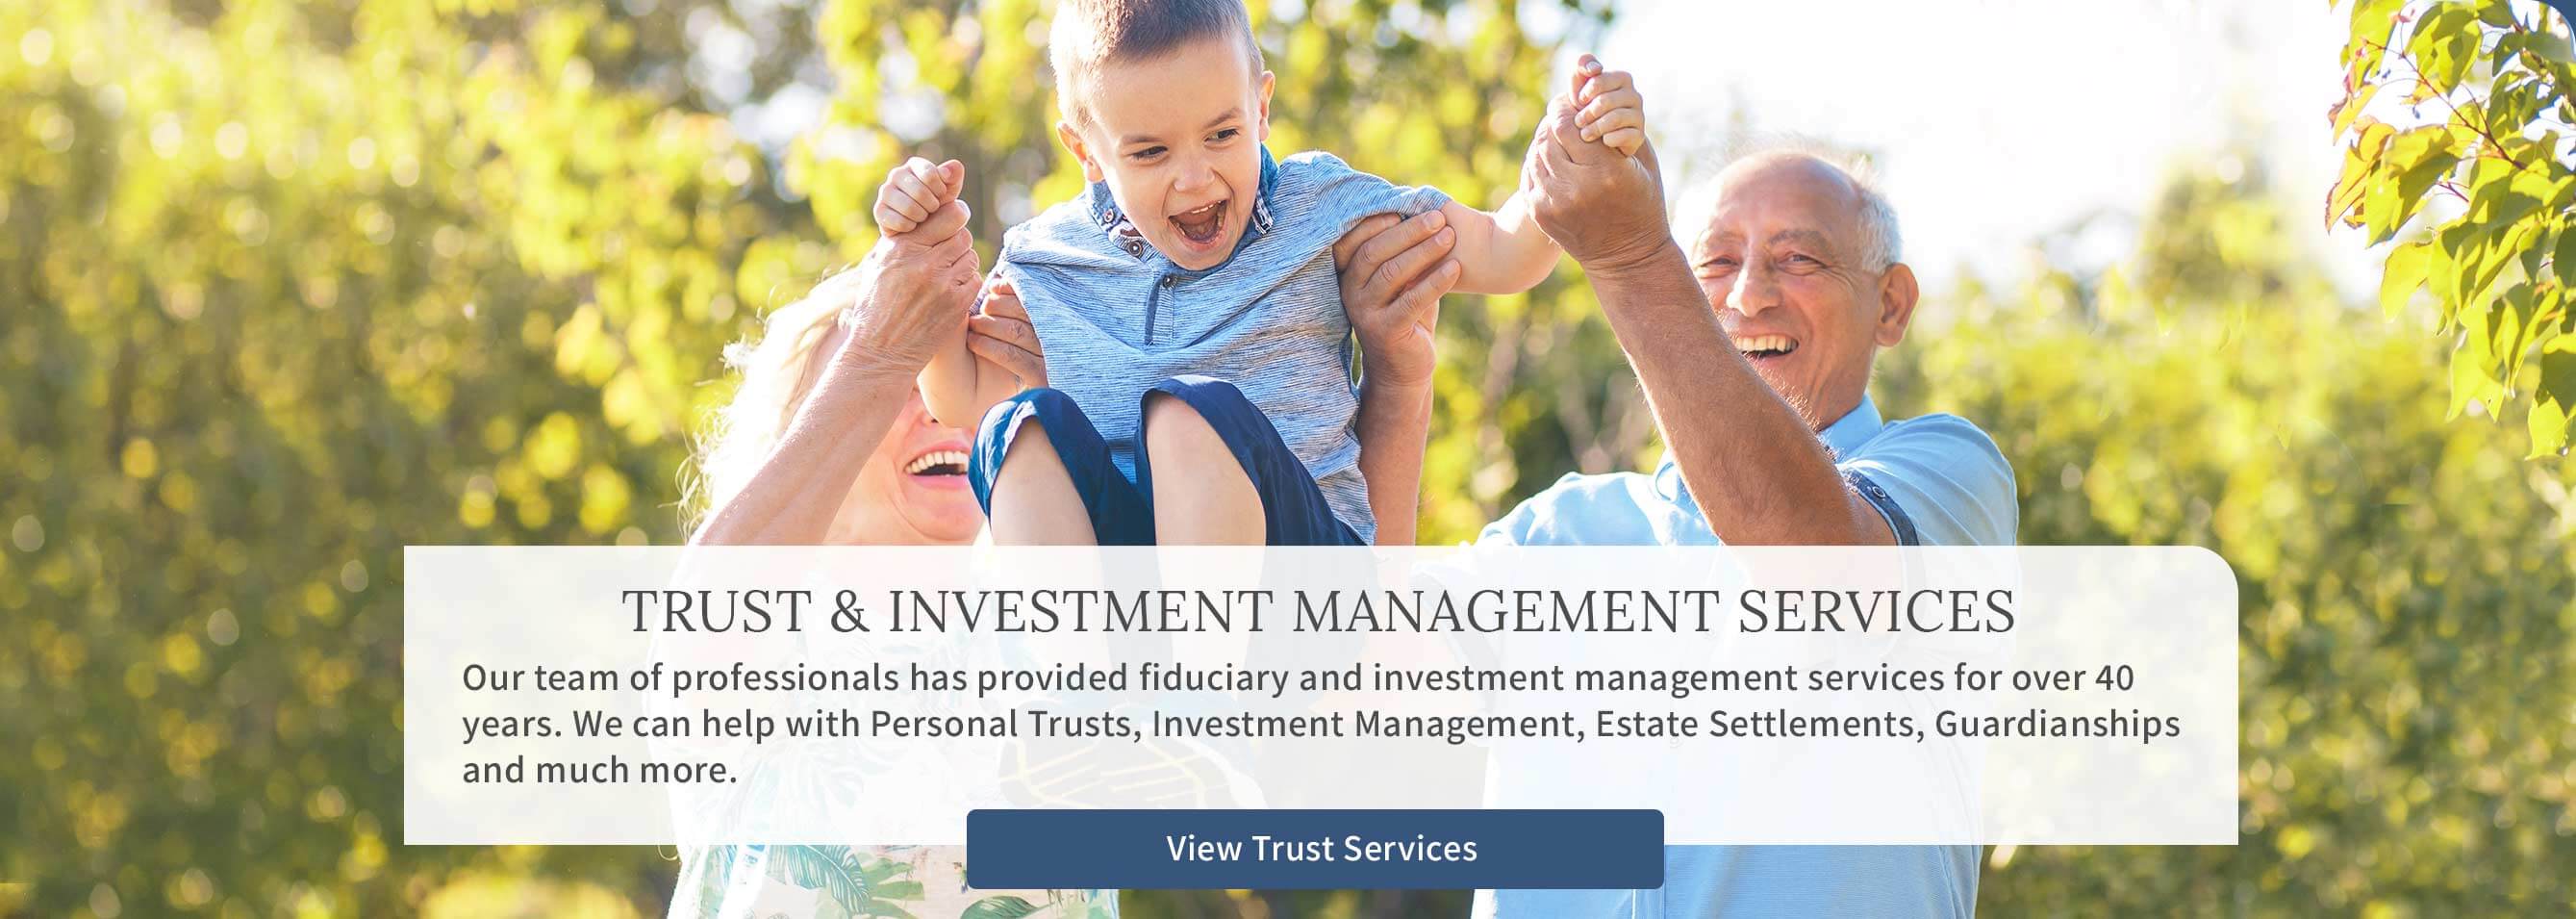 Trust & Investment Management - Our team of professionals has provided fiduciary and investment management services for over 40 years. - View Trust Services